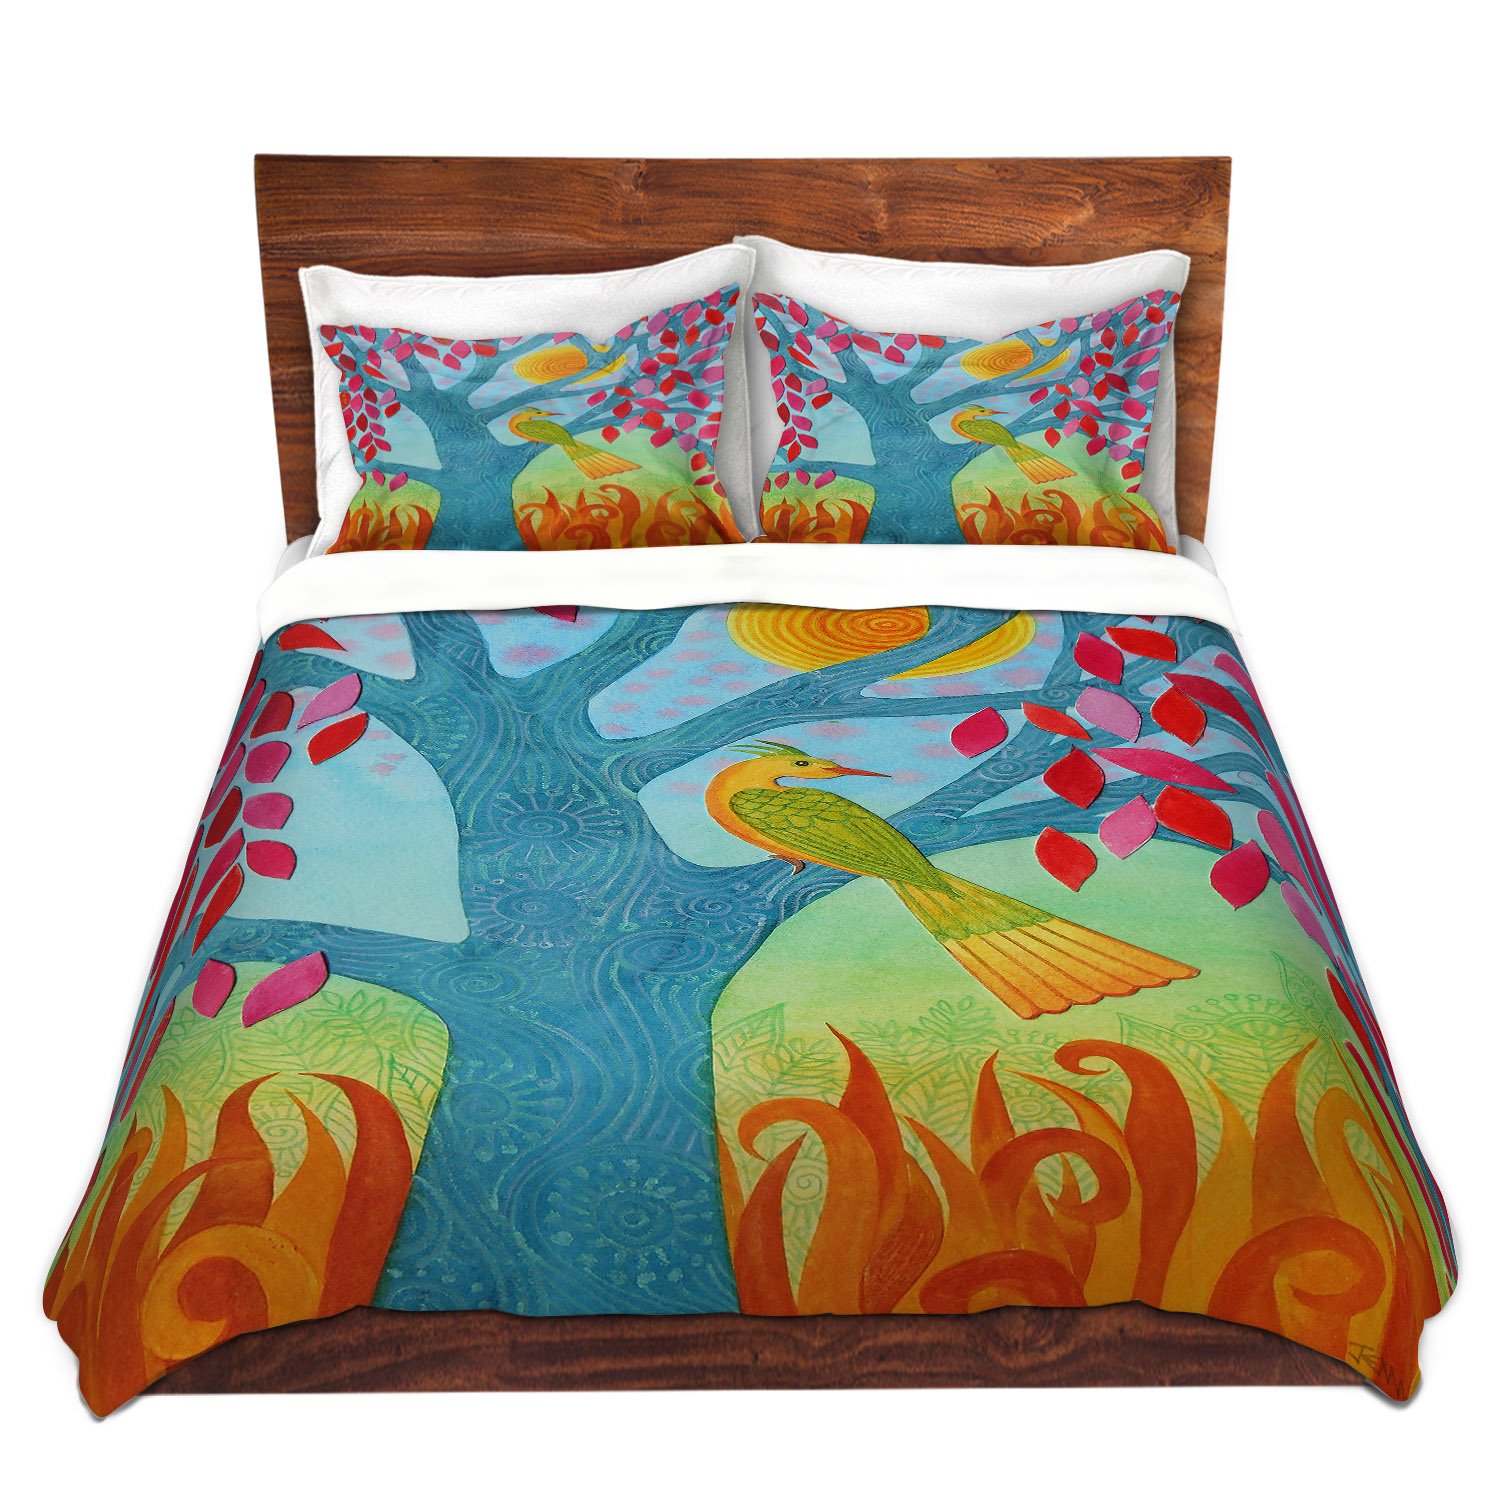 Dianoche Microfiber Duvet Covers By Jennifer Baird - Bird In Red Leaf Tree